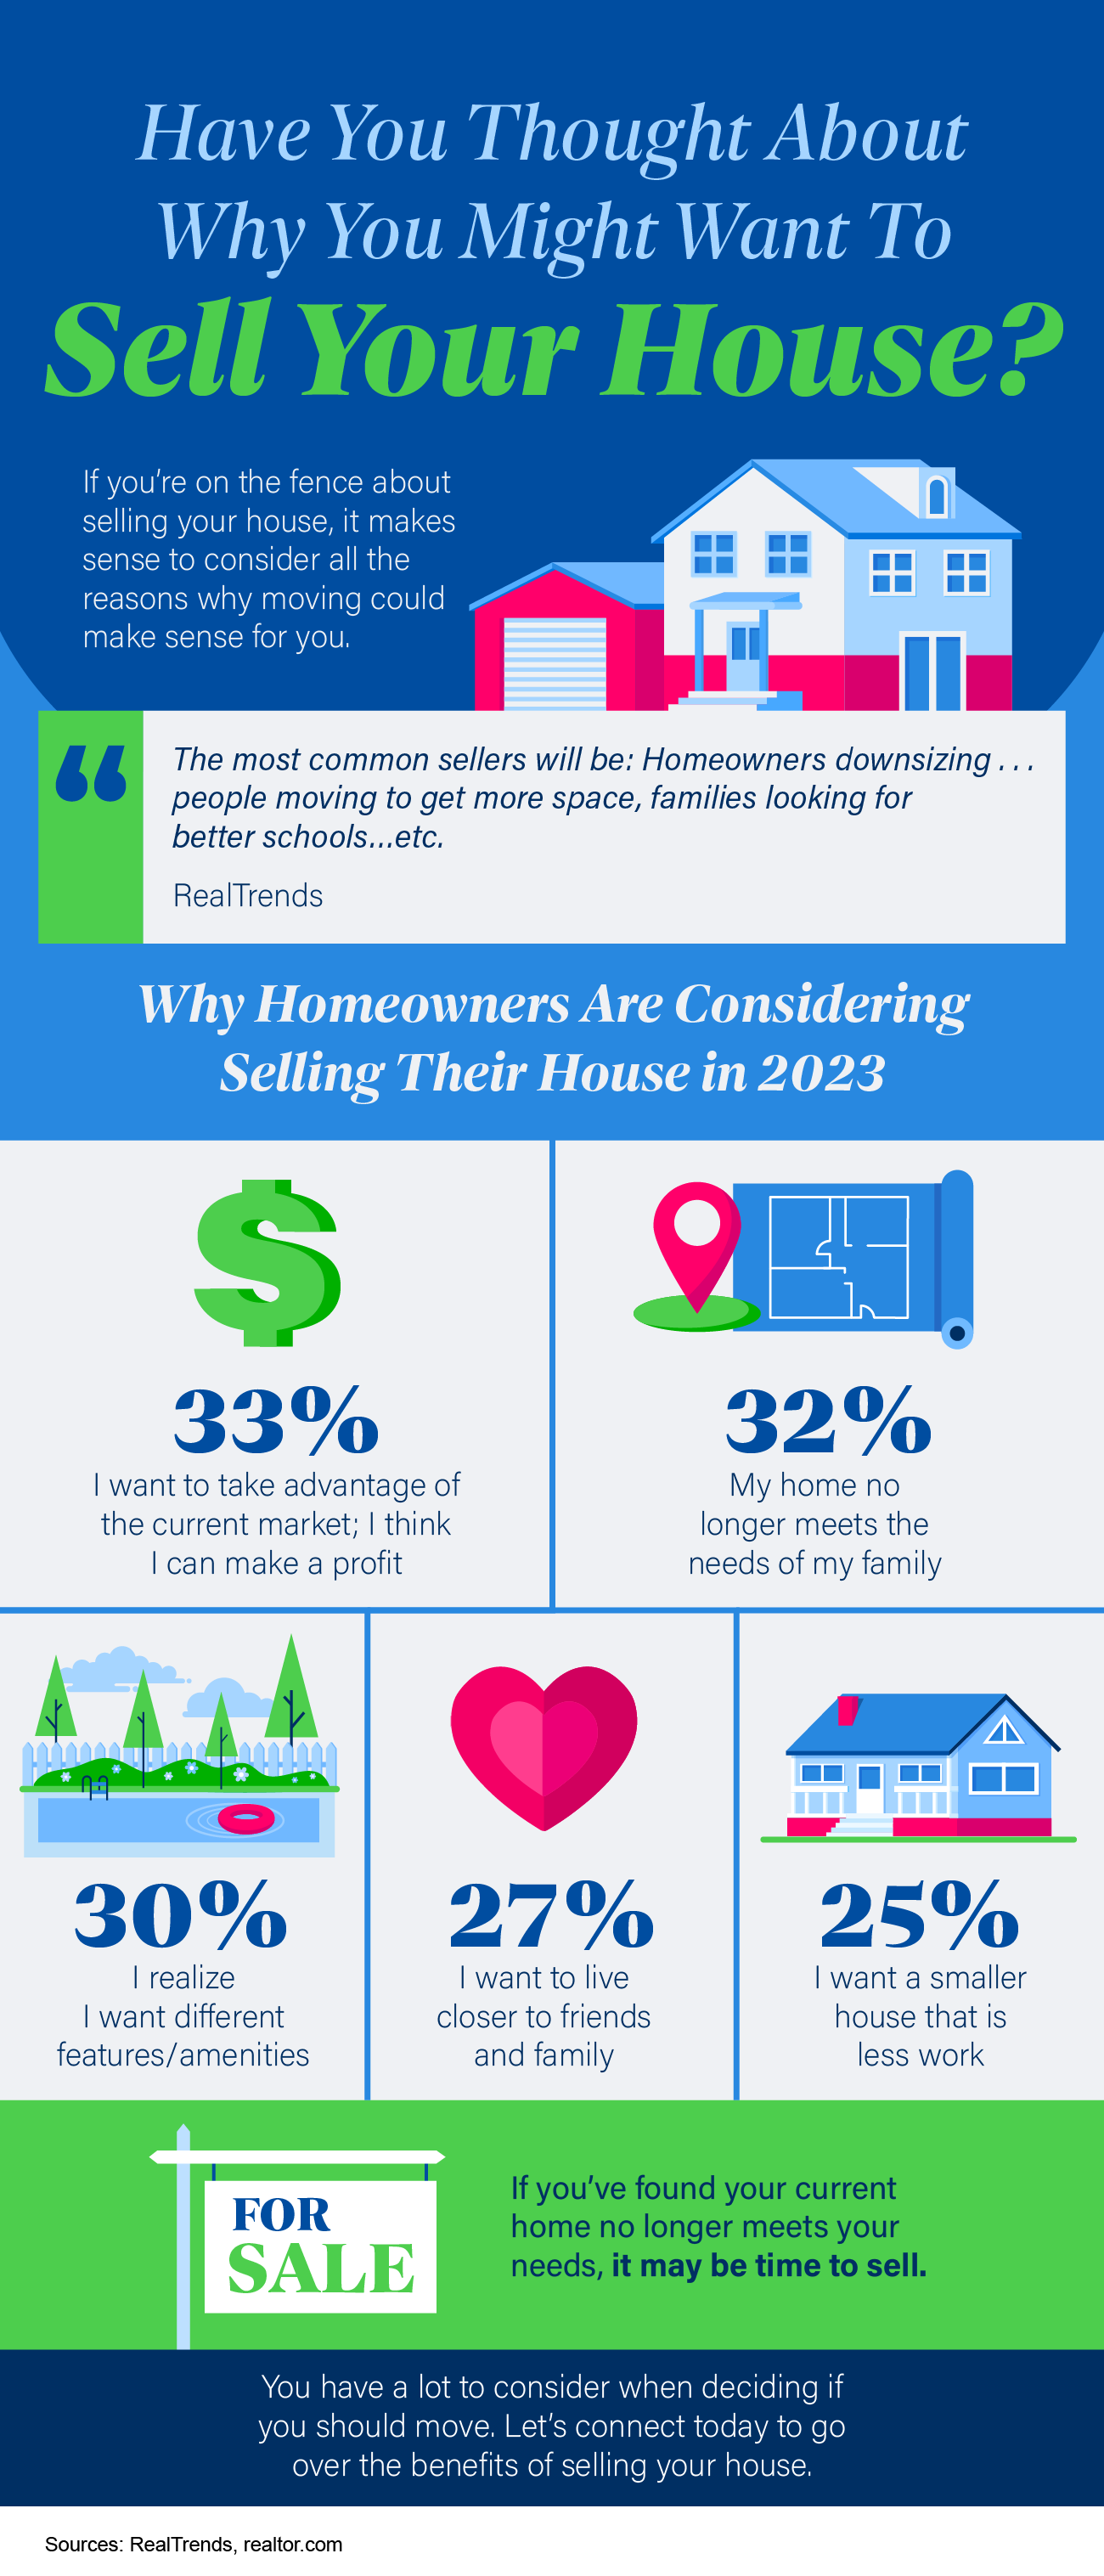 Have You Thought About Why You Might Want To Sell Your House - KM Realty Group LLC, Chicago